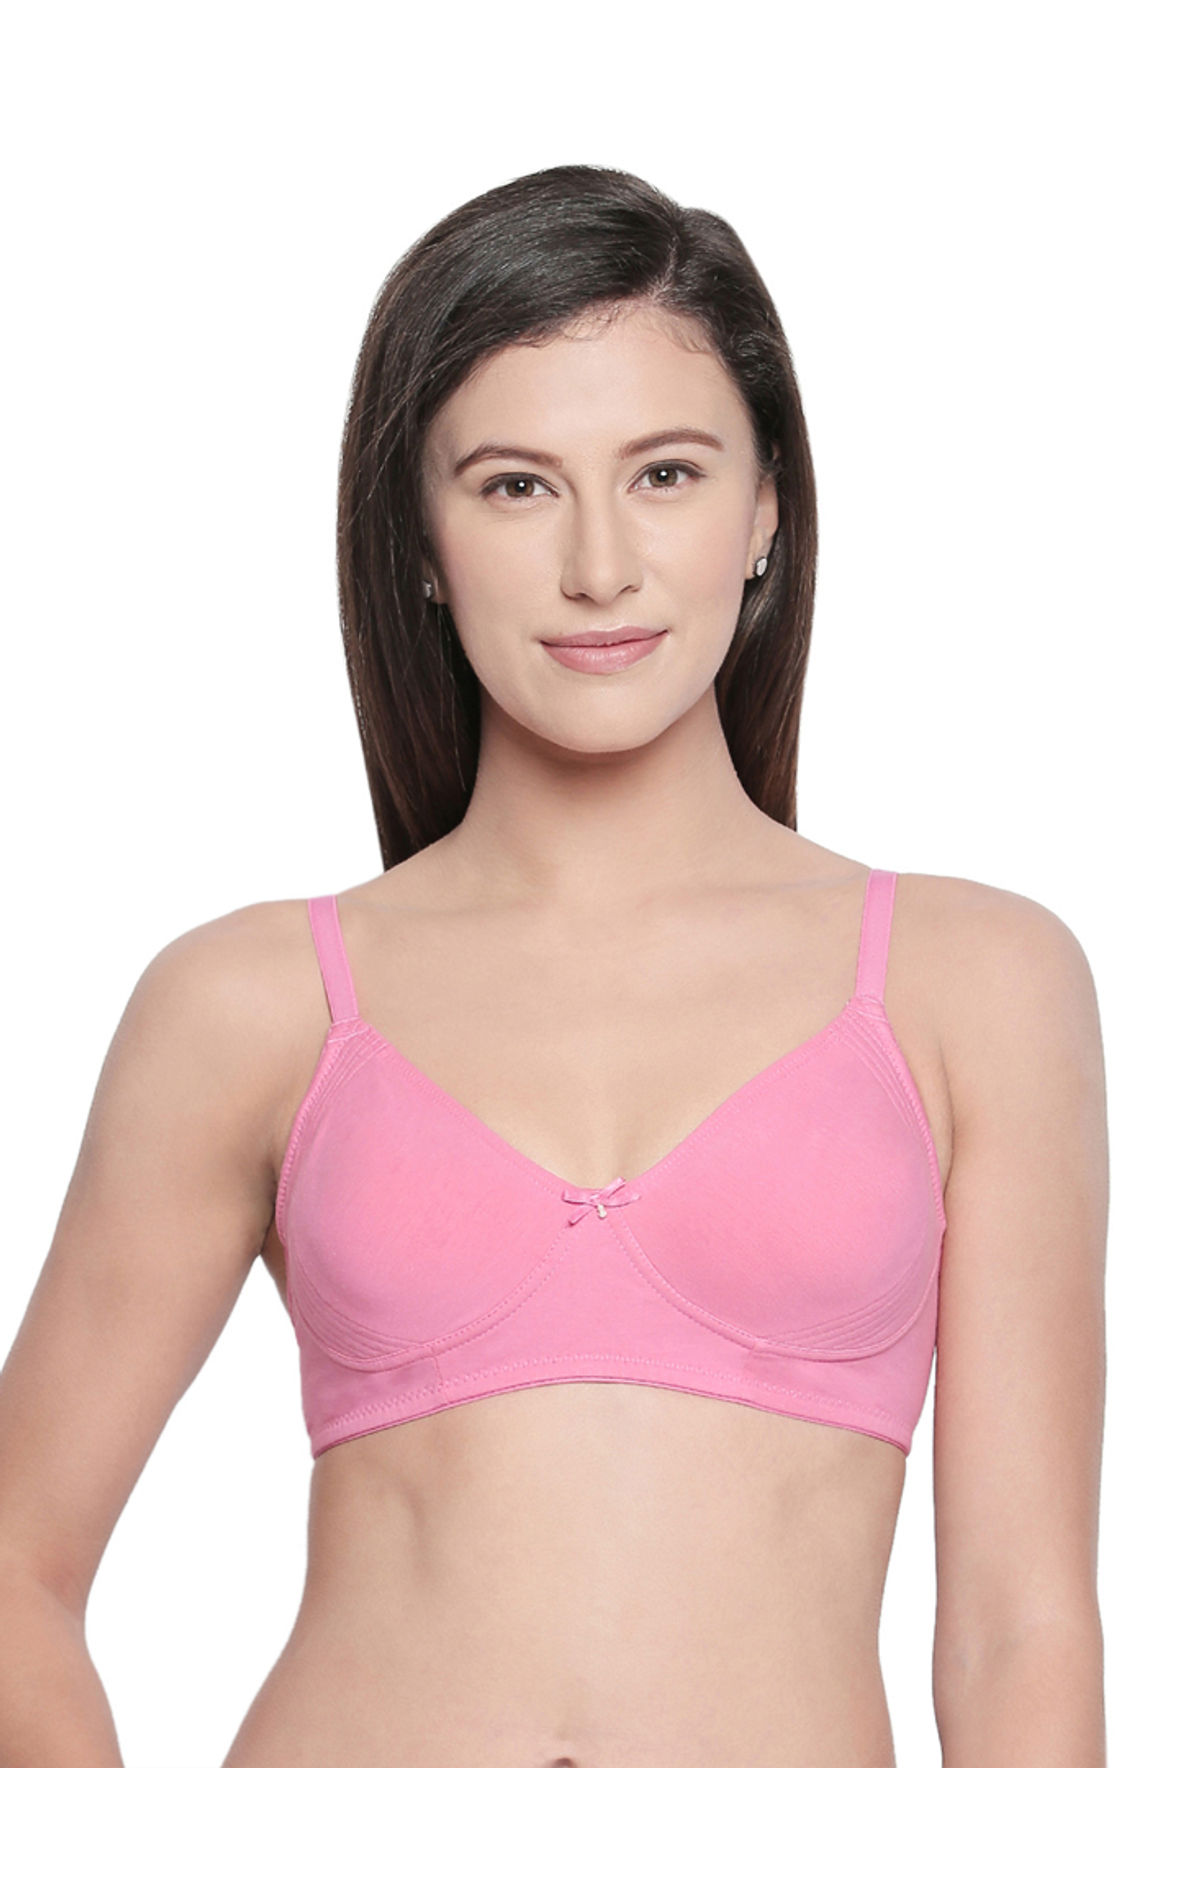 BODYCARE Sh-Es-S B-C-D Cup Bra with Elastic Straps Skin in Delhi at best  price by Any Time Buy - Justdial